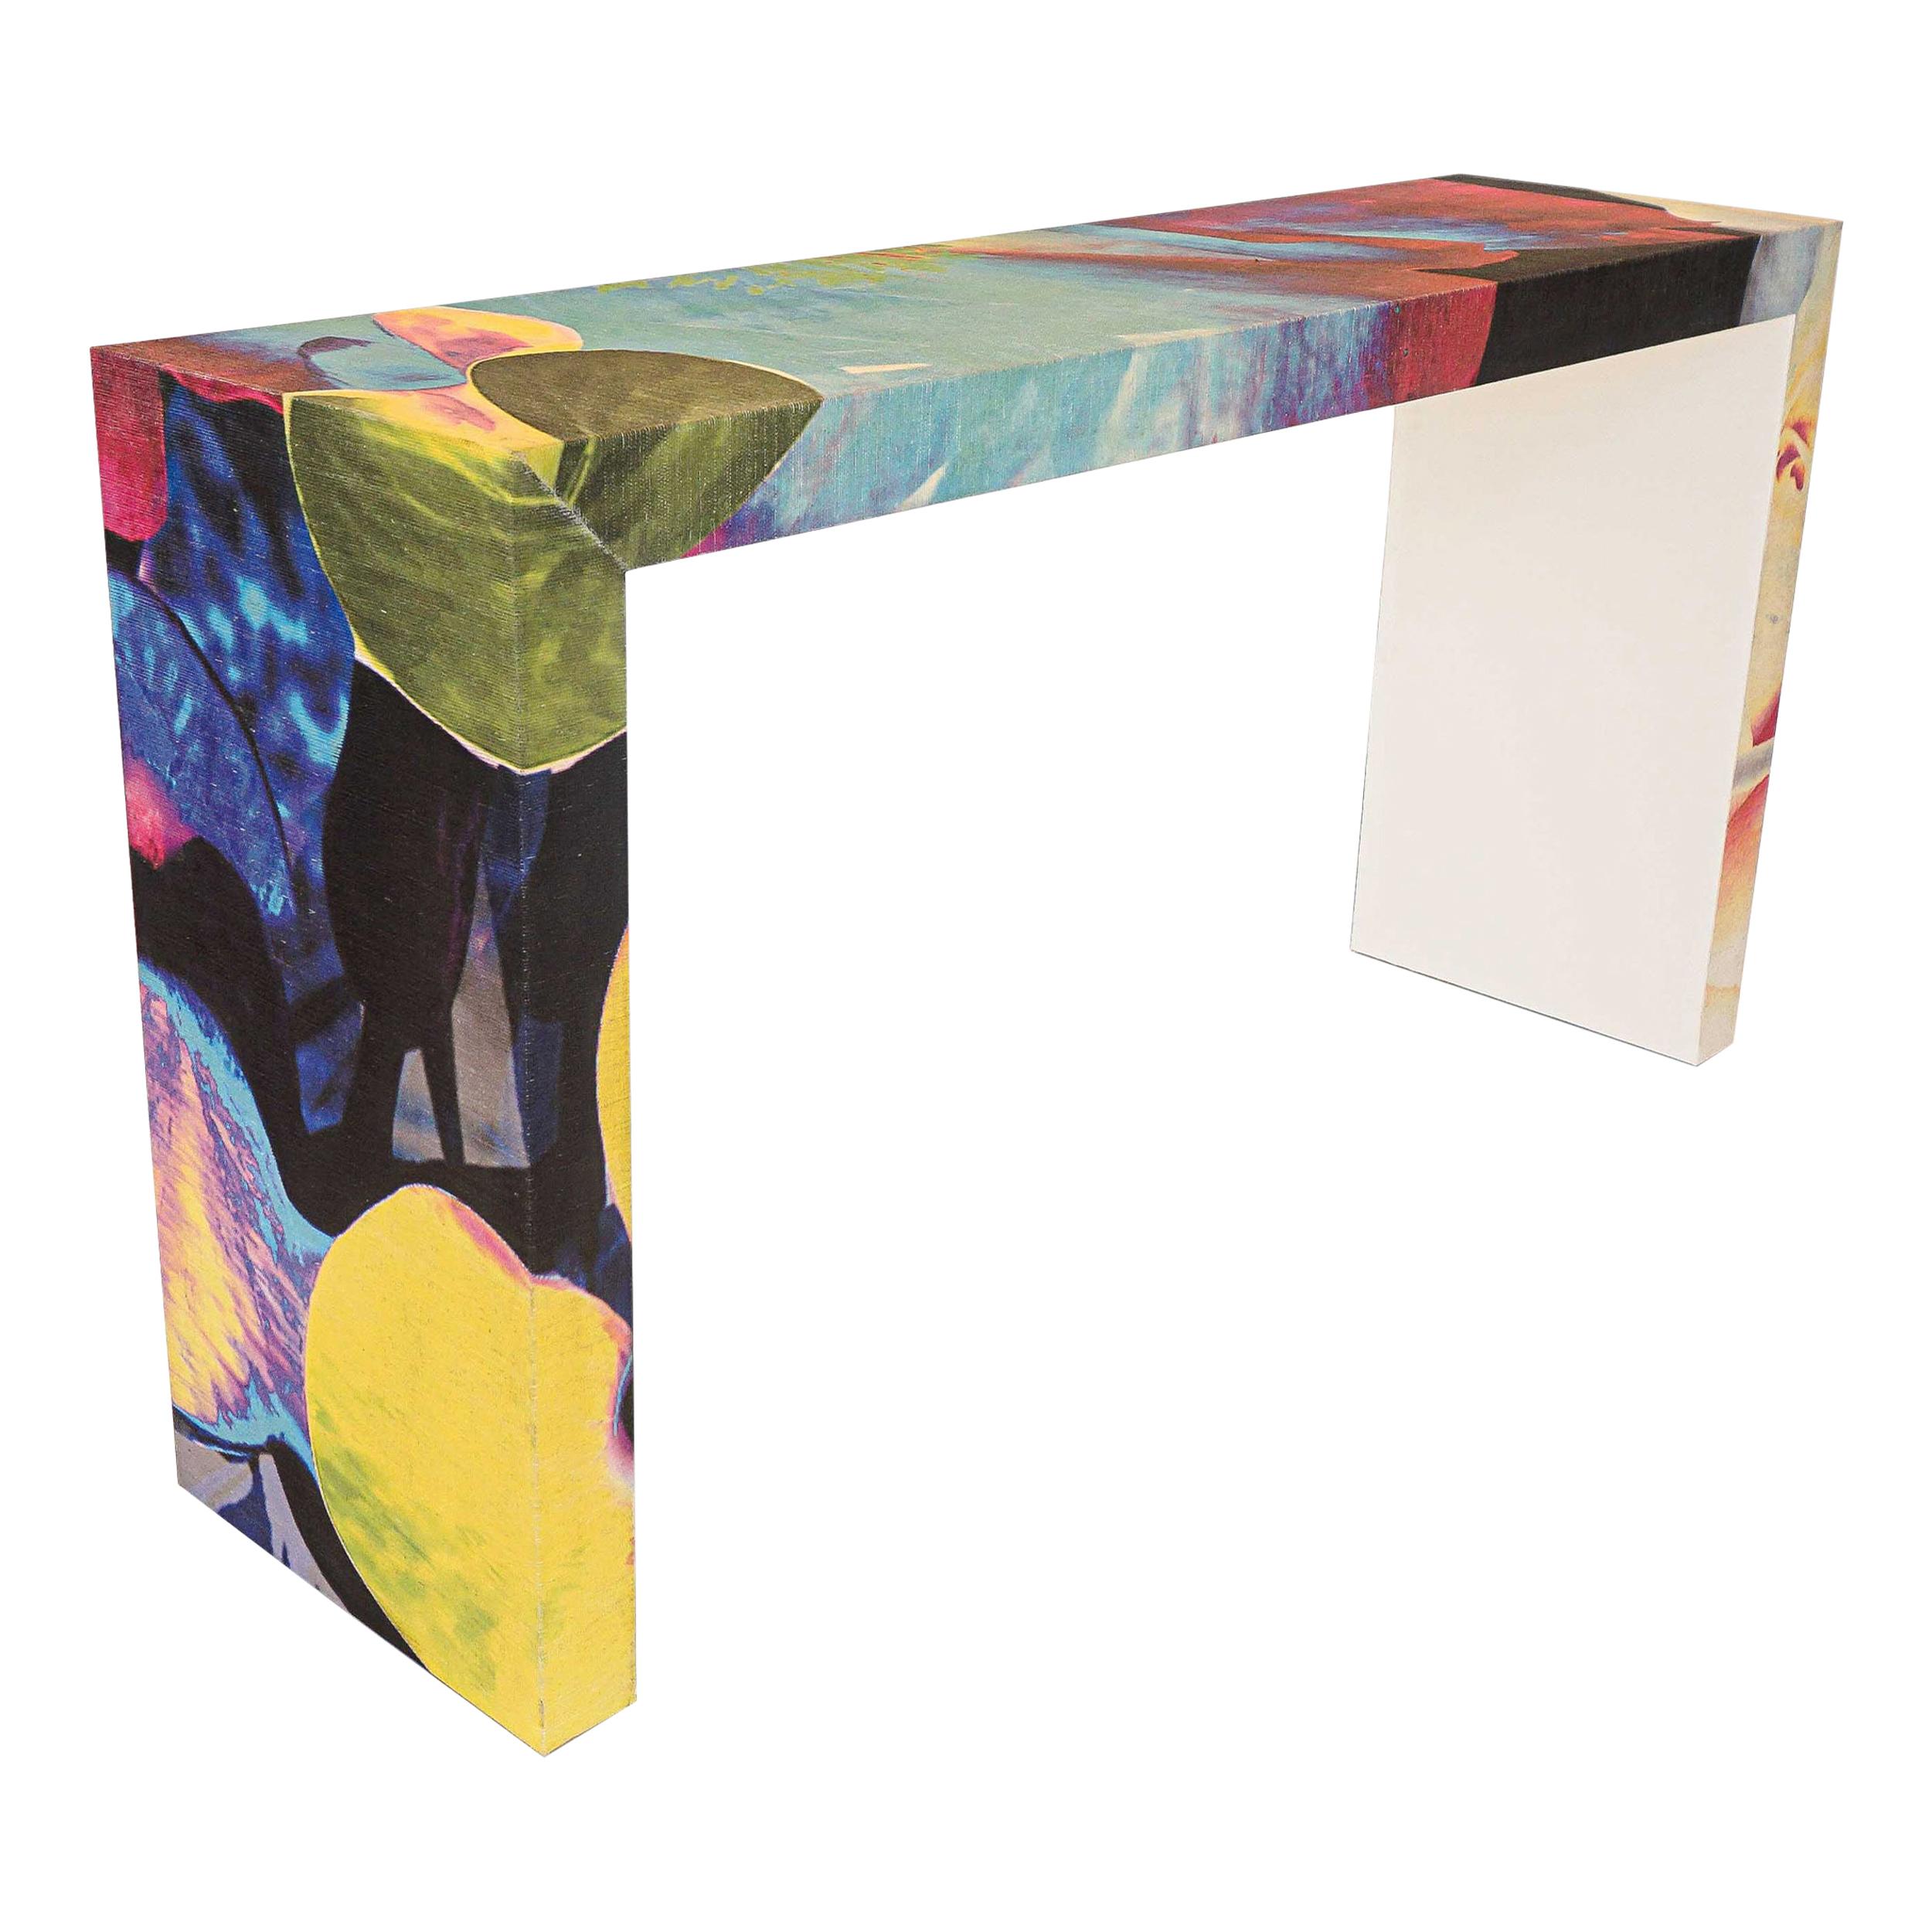 Multi-Colored Floral Waterfall Console Table